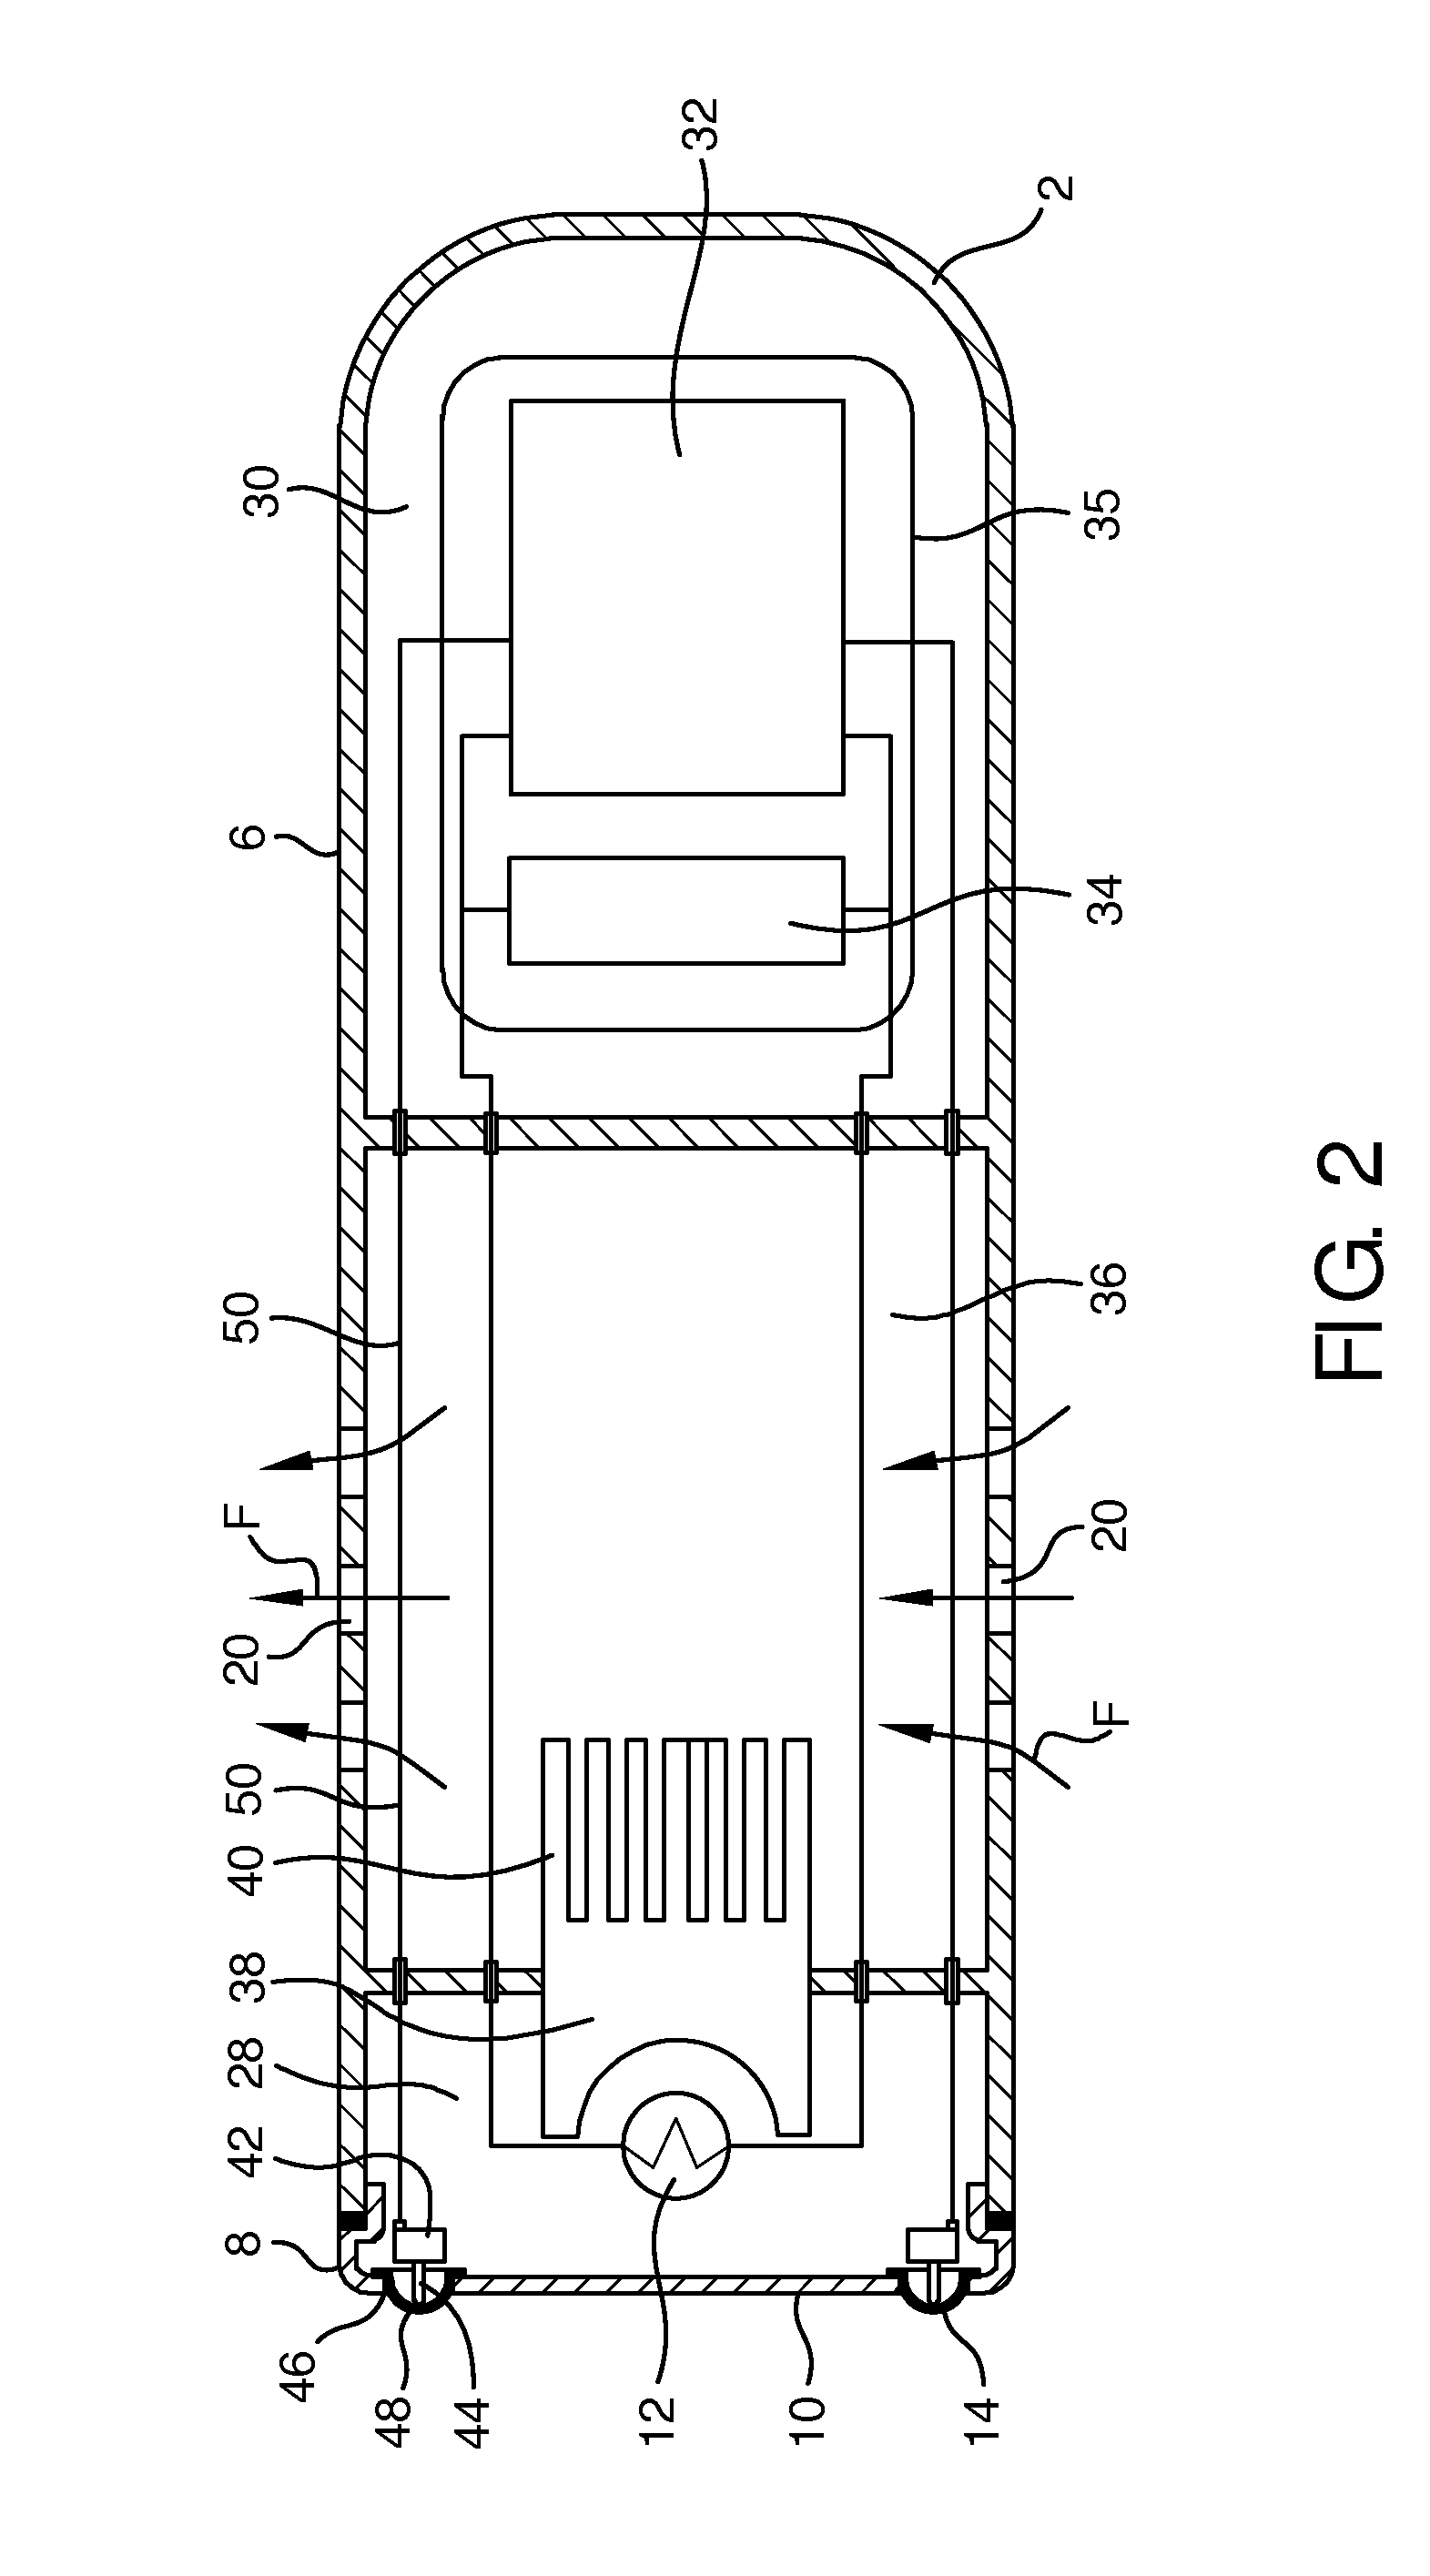 Electromagnetic skin treatment device